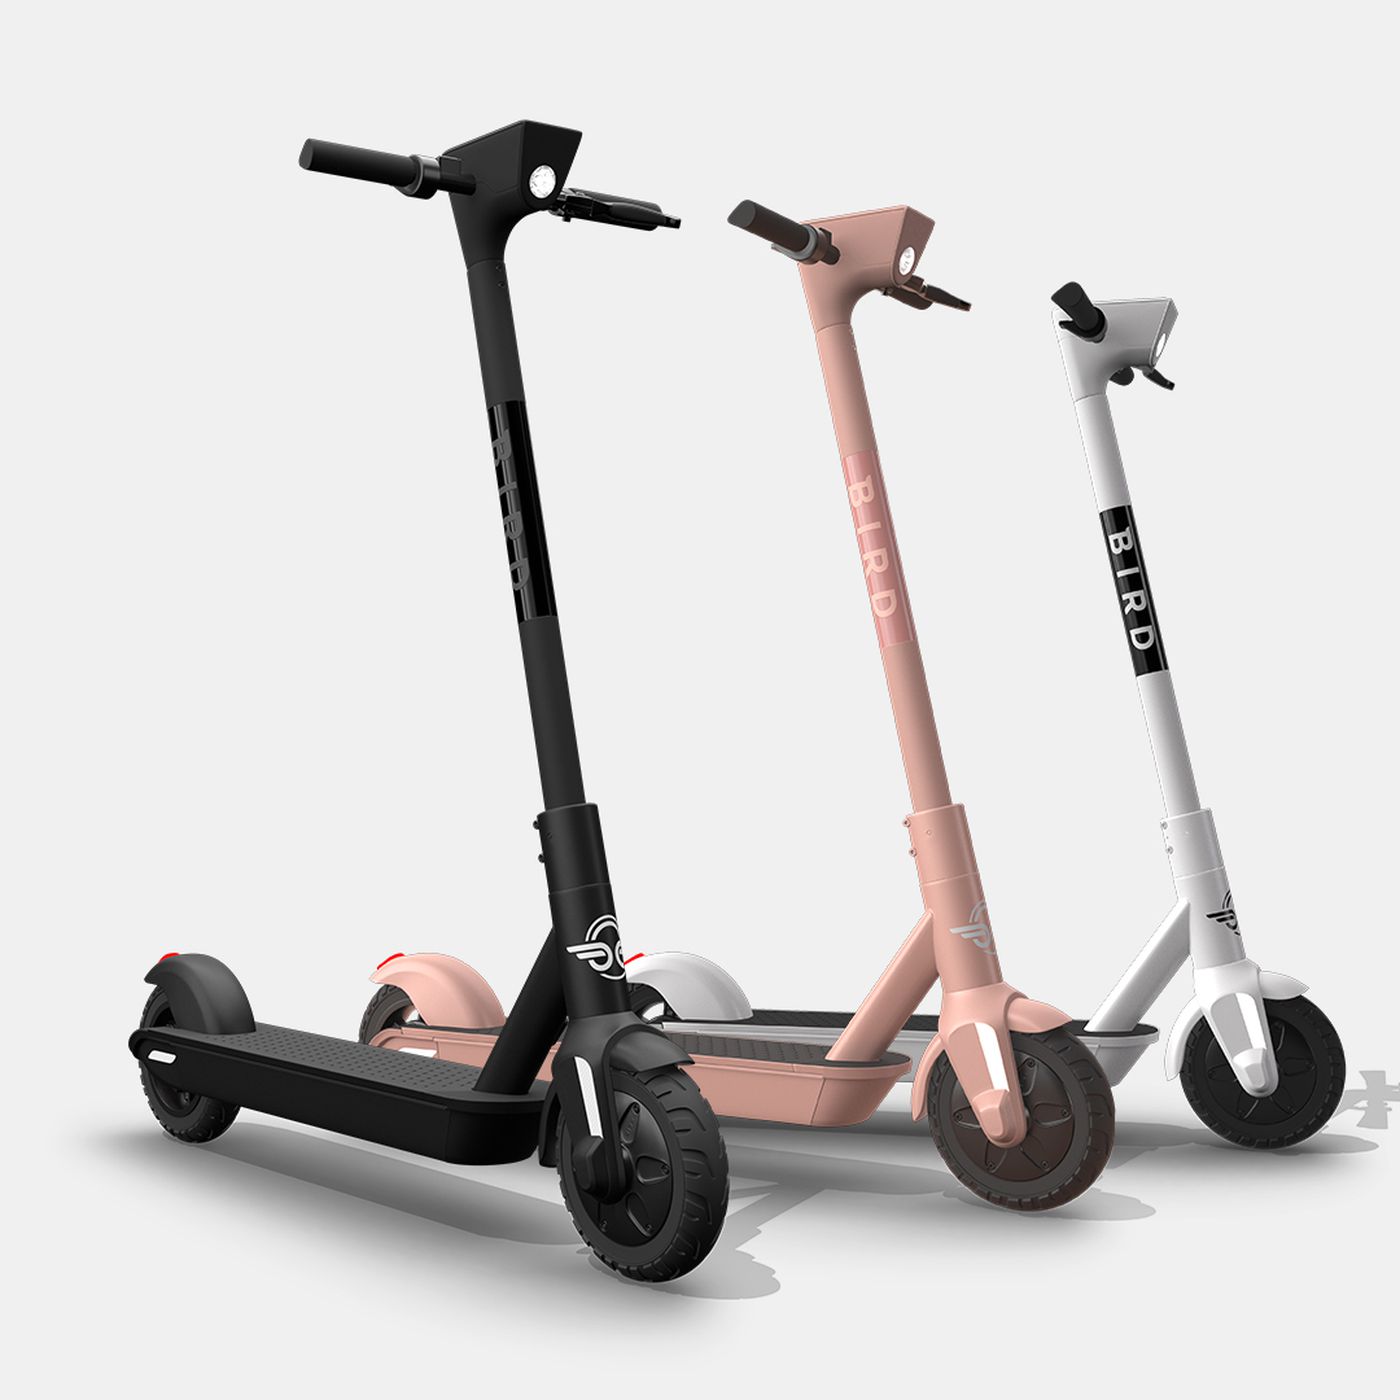 What is the best scooter?